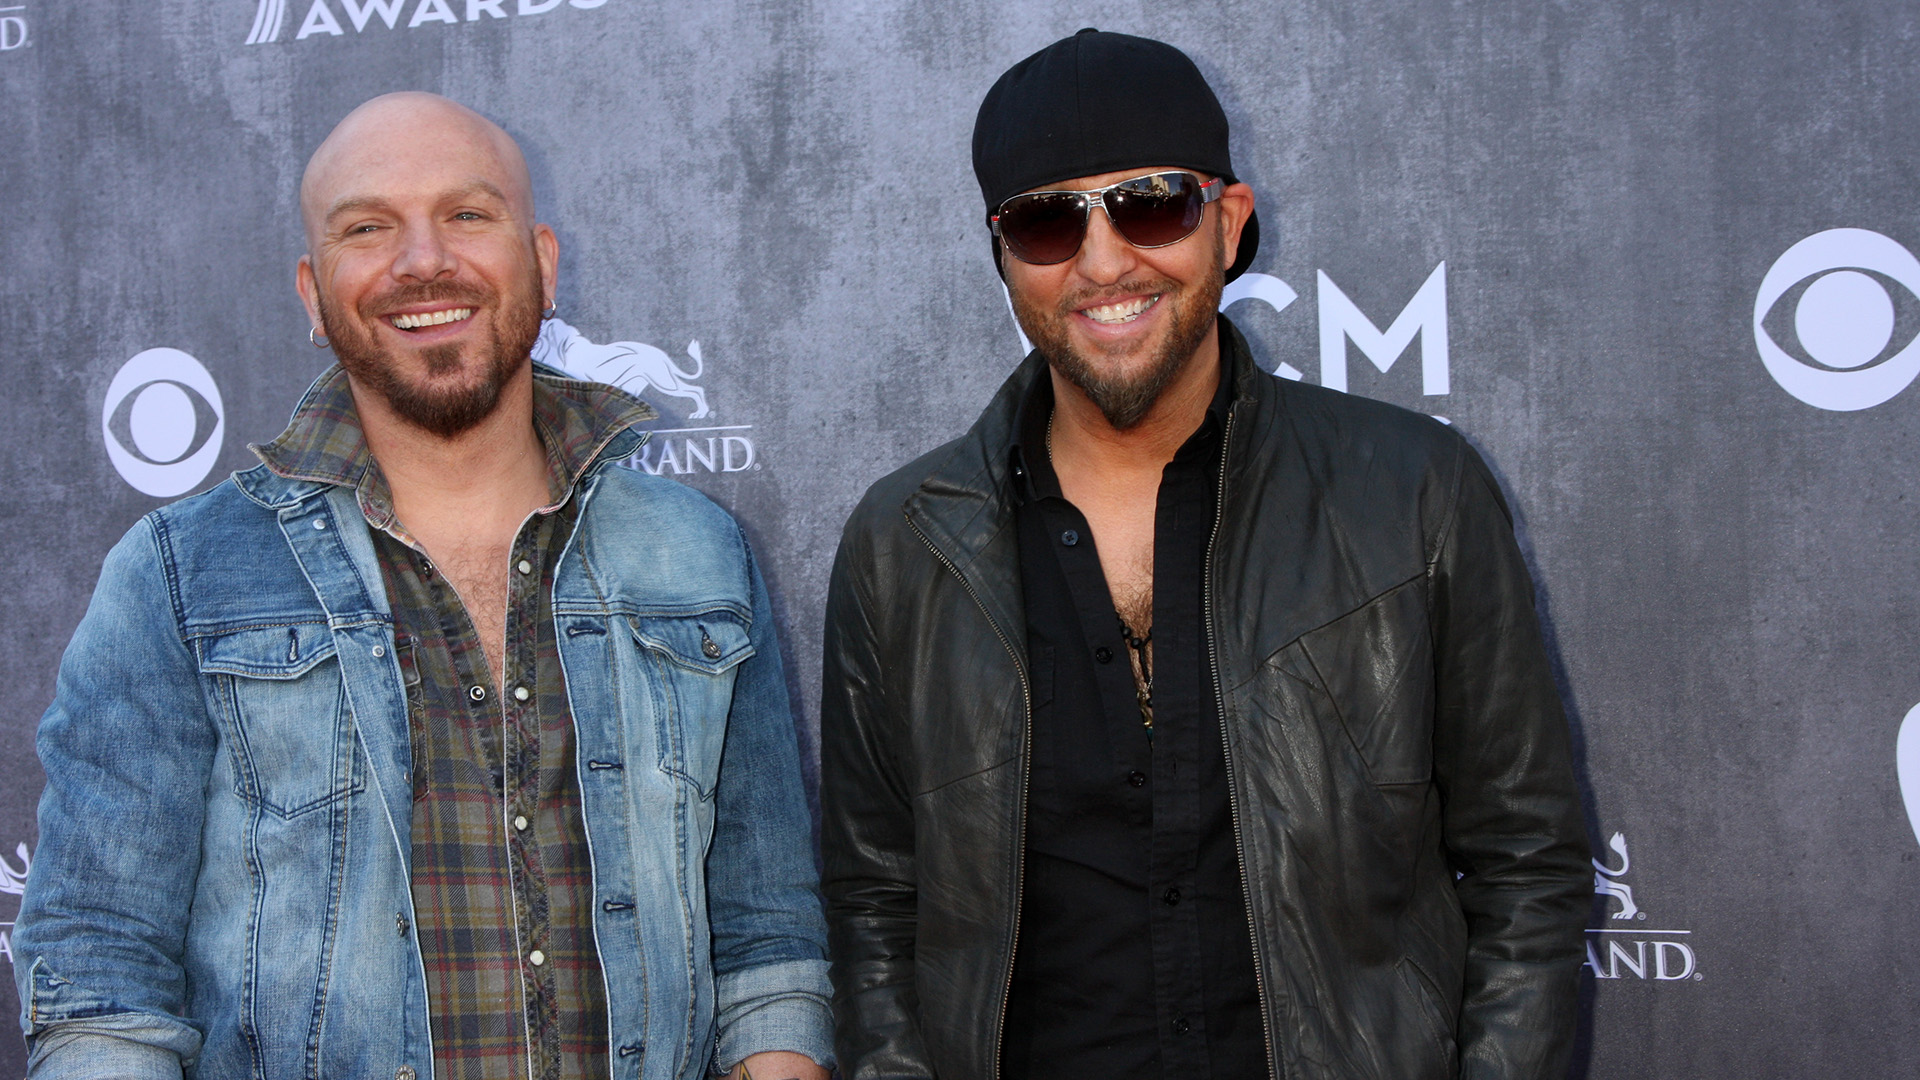 LoCash were all smiles at the ACM Awards in 2014.